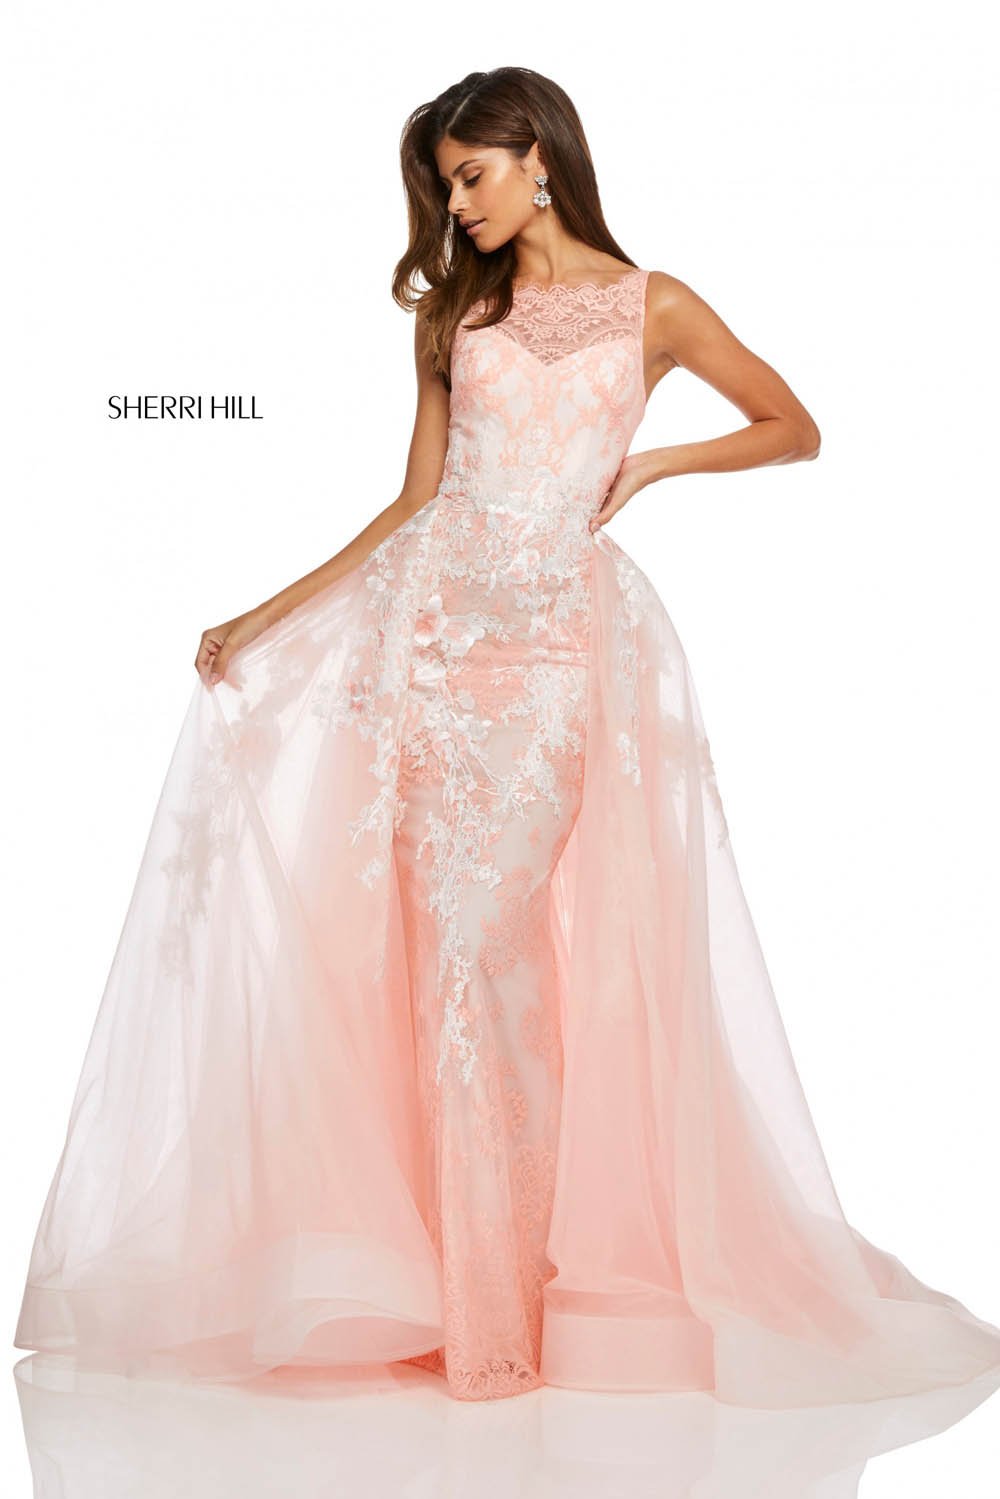 Sherri Hill 52660 dress images in these colors: Coral, Ivory.